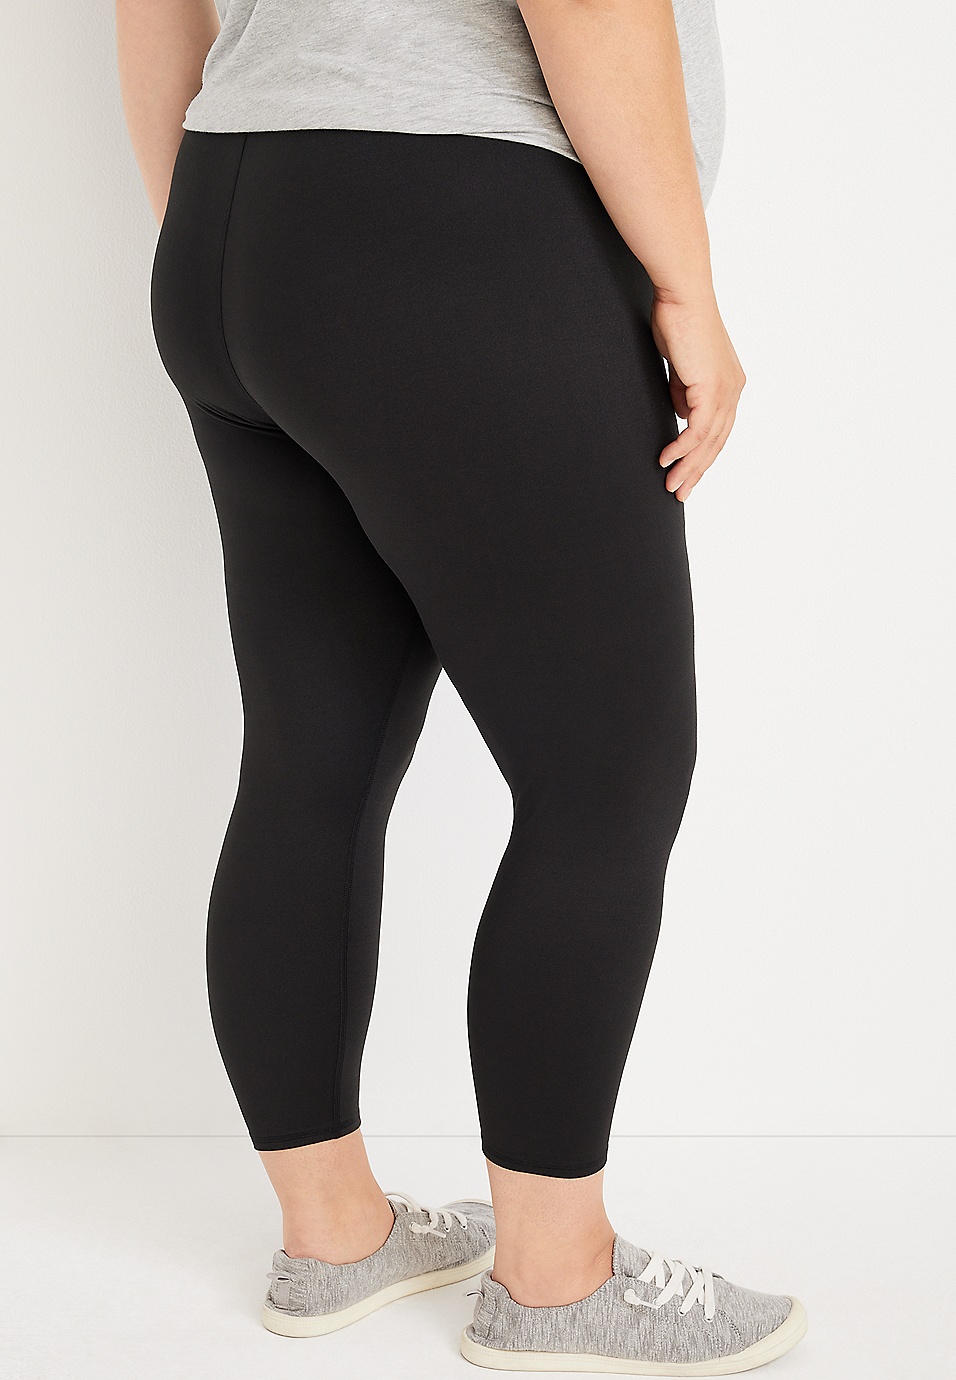 Mamalicious Maternity over the bump leggings with seam detail in black